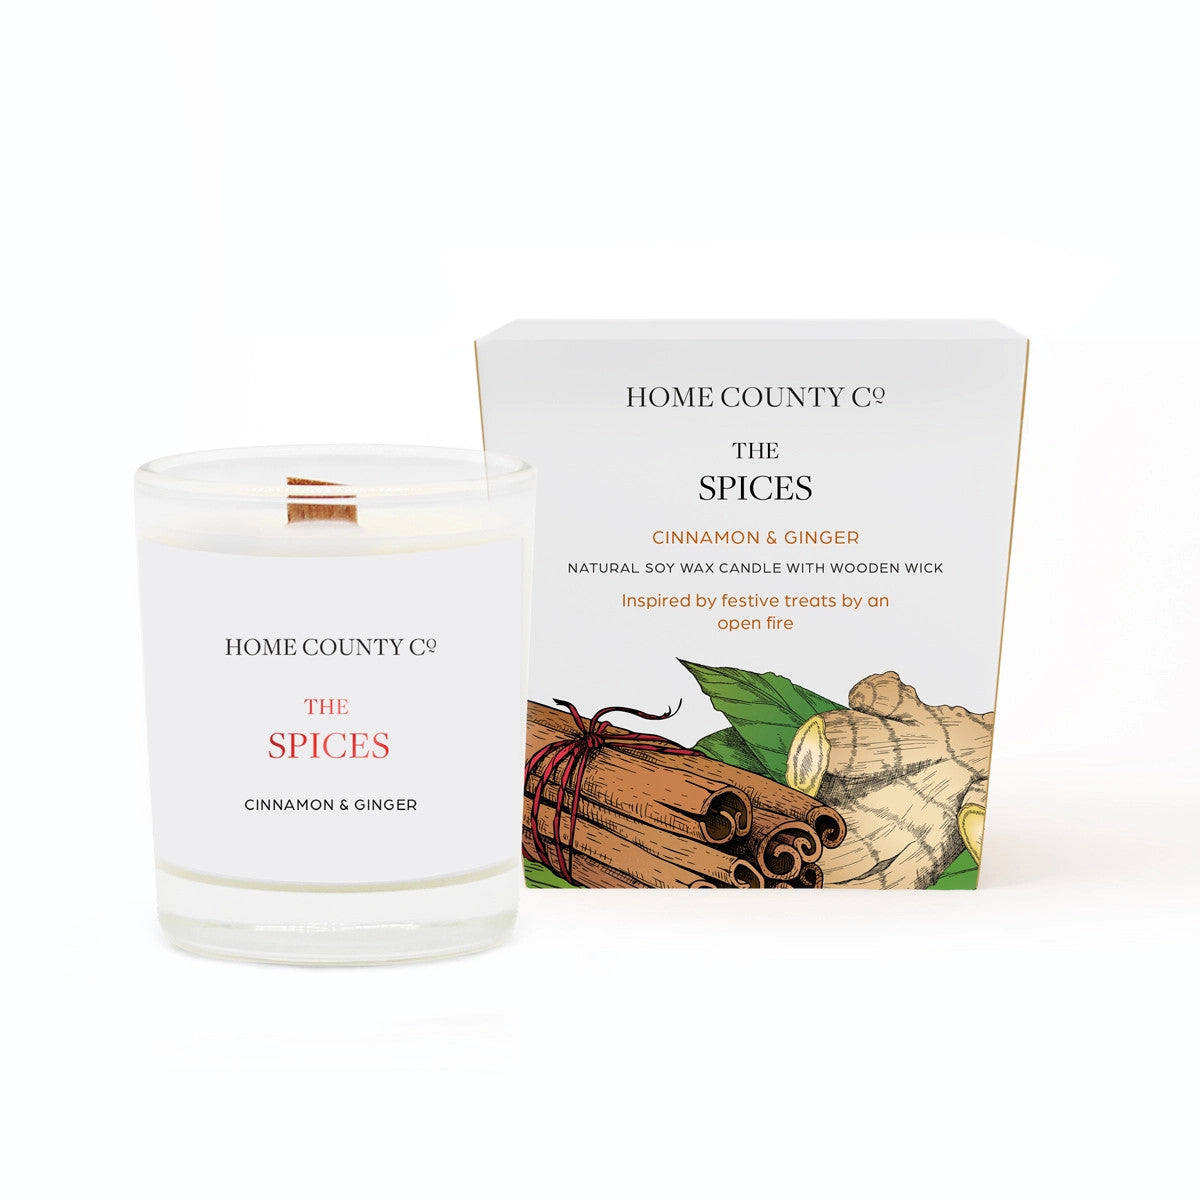 The Spices - Cinnamon & Ginger Soy Votive Candle by Home County Candles